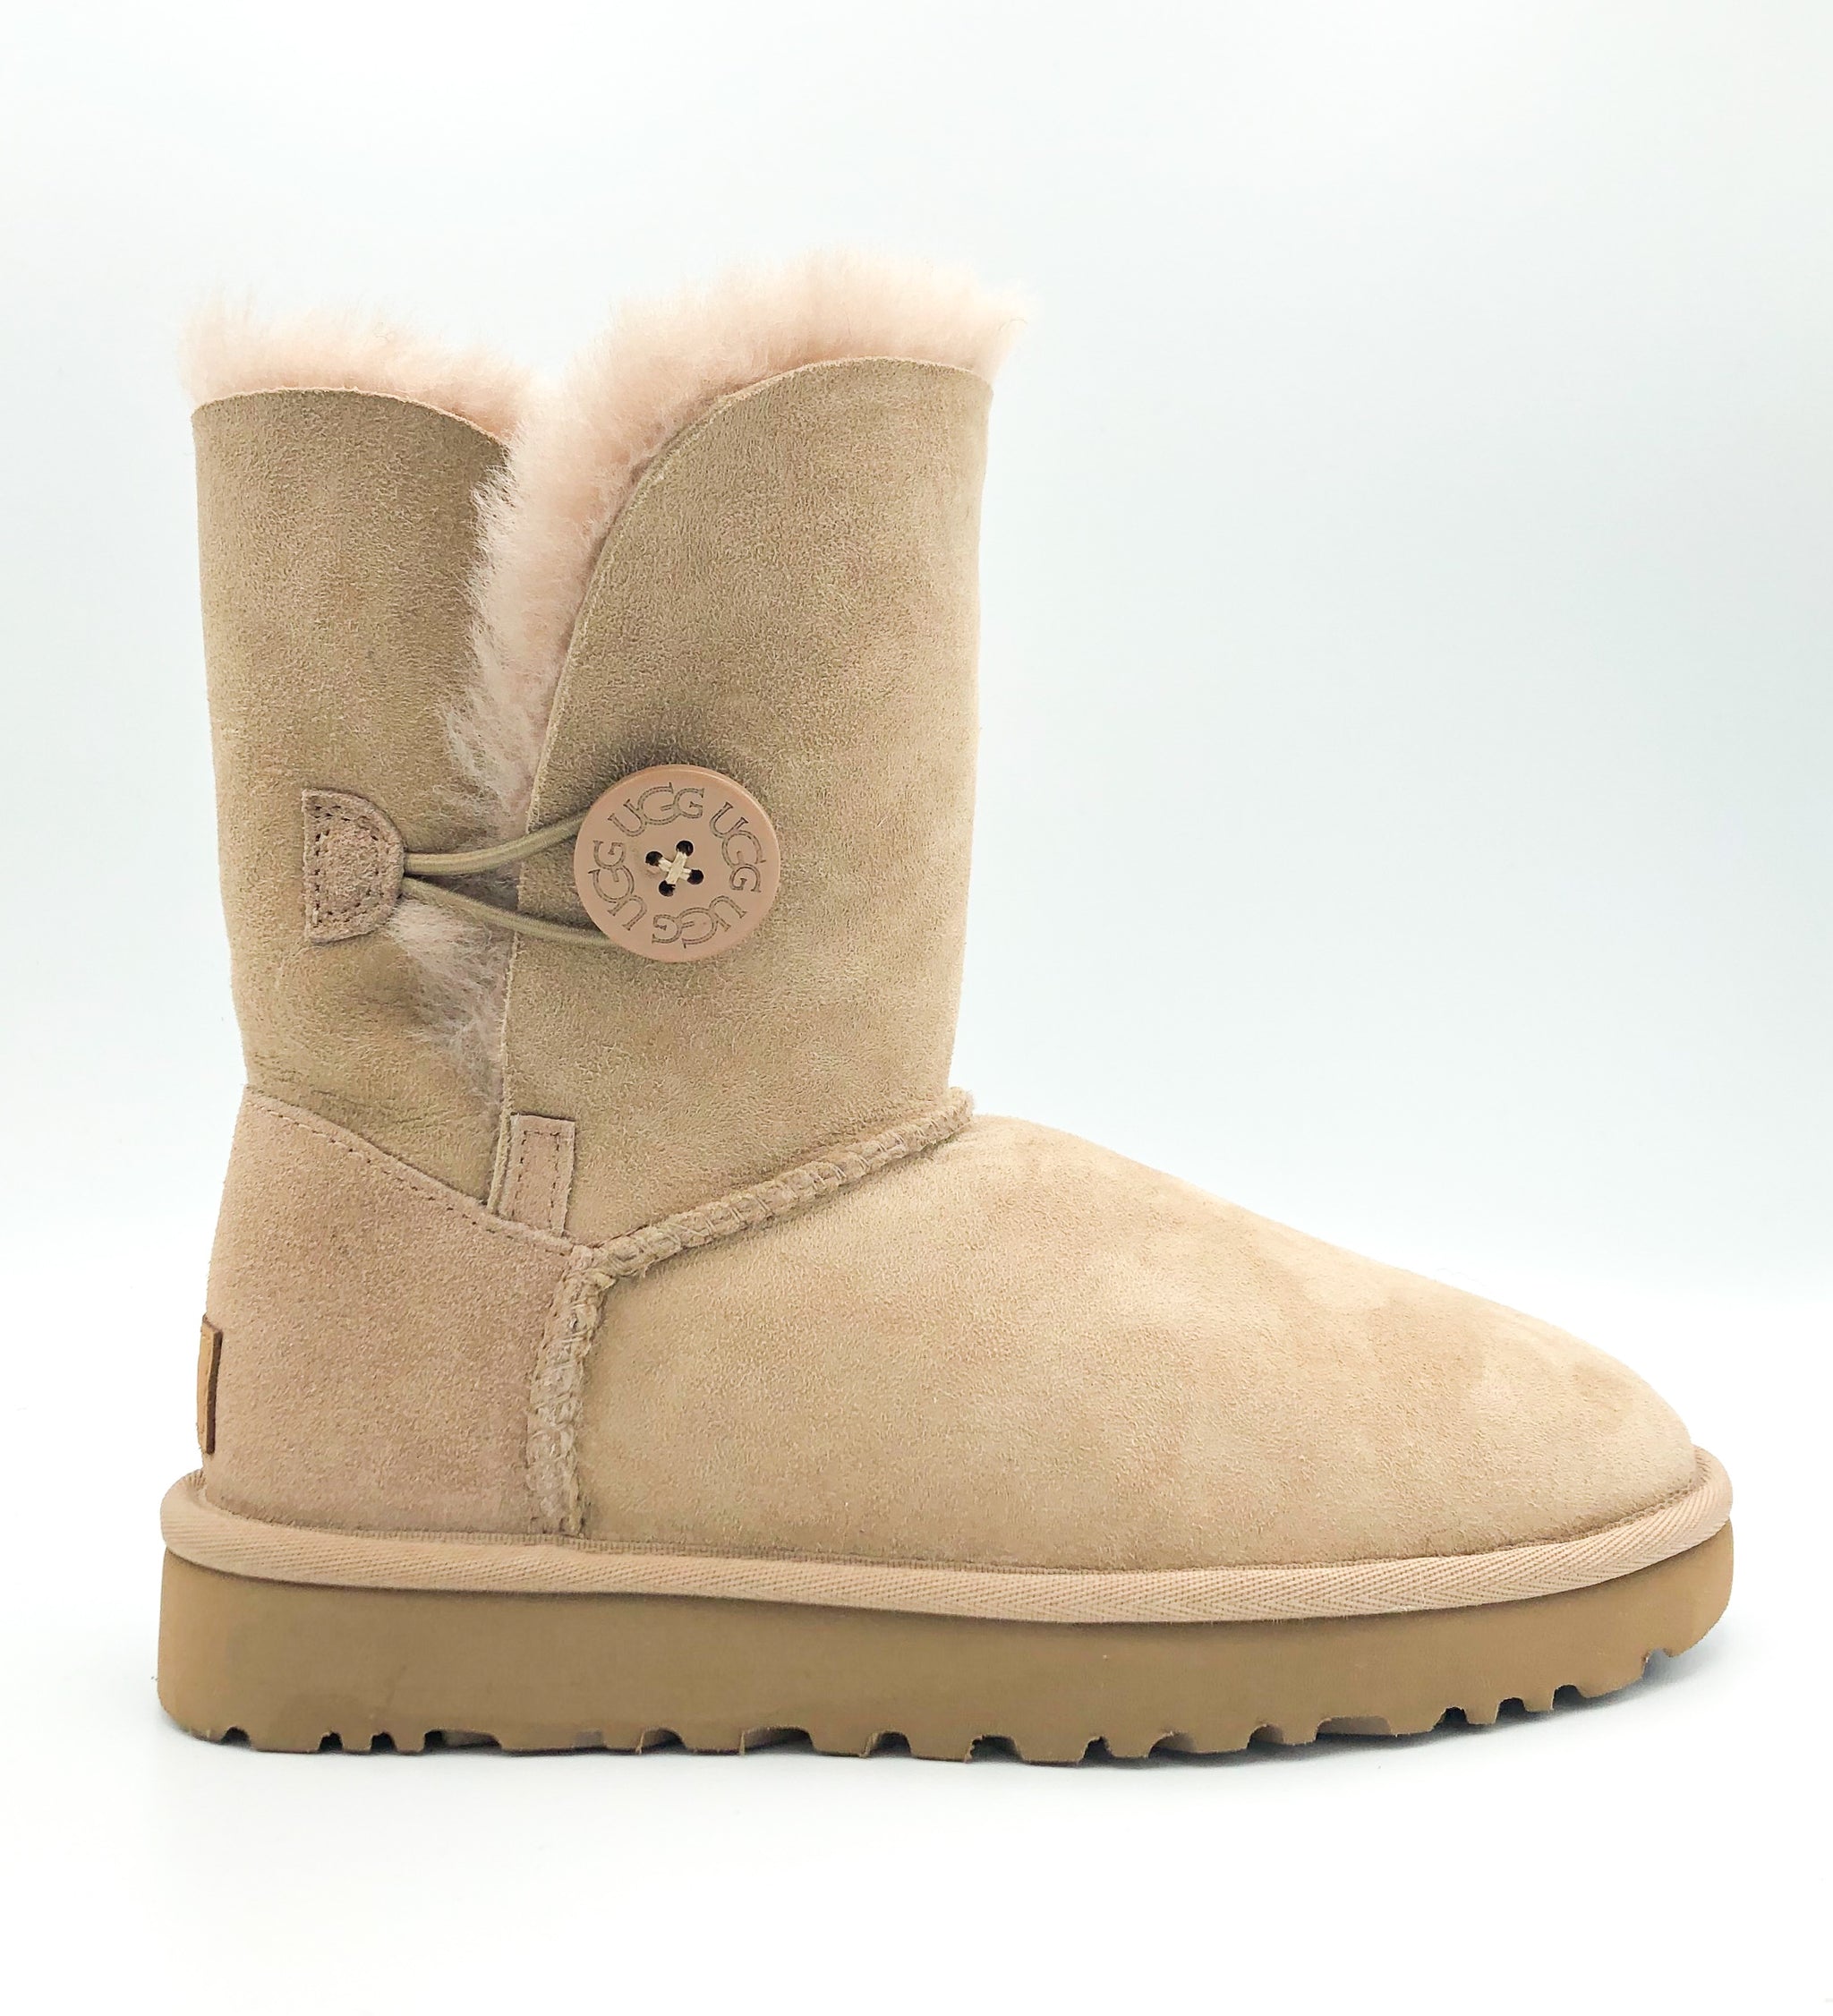 UGG - BAILEY BUTTON II IN FAWN - the 